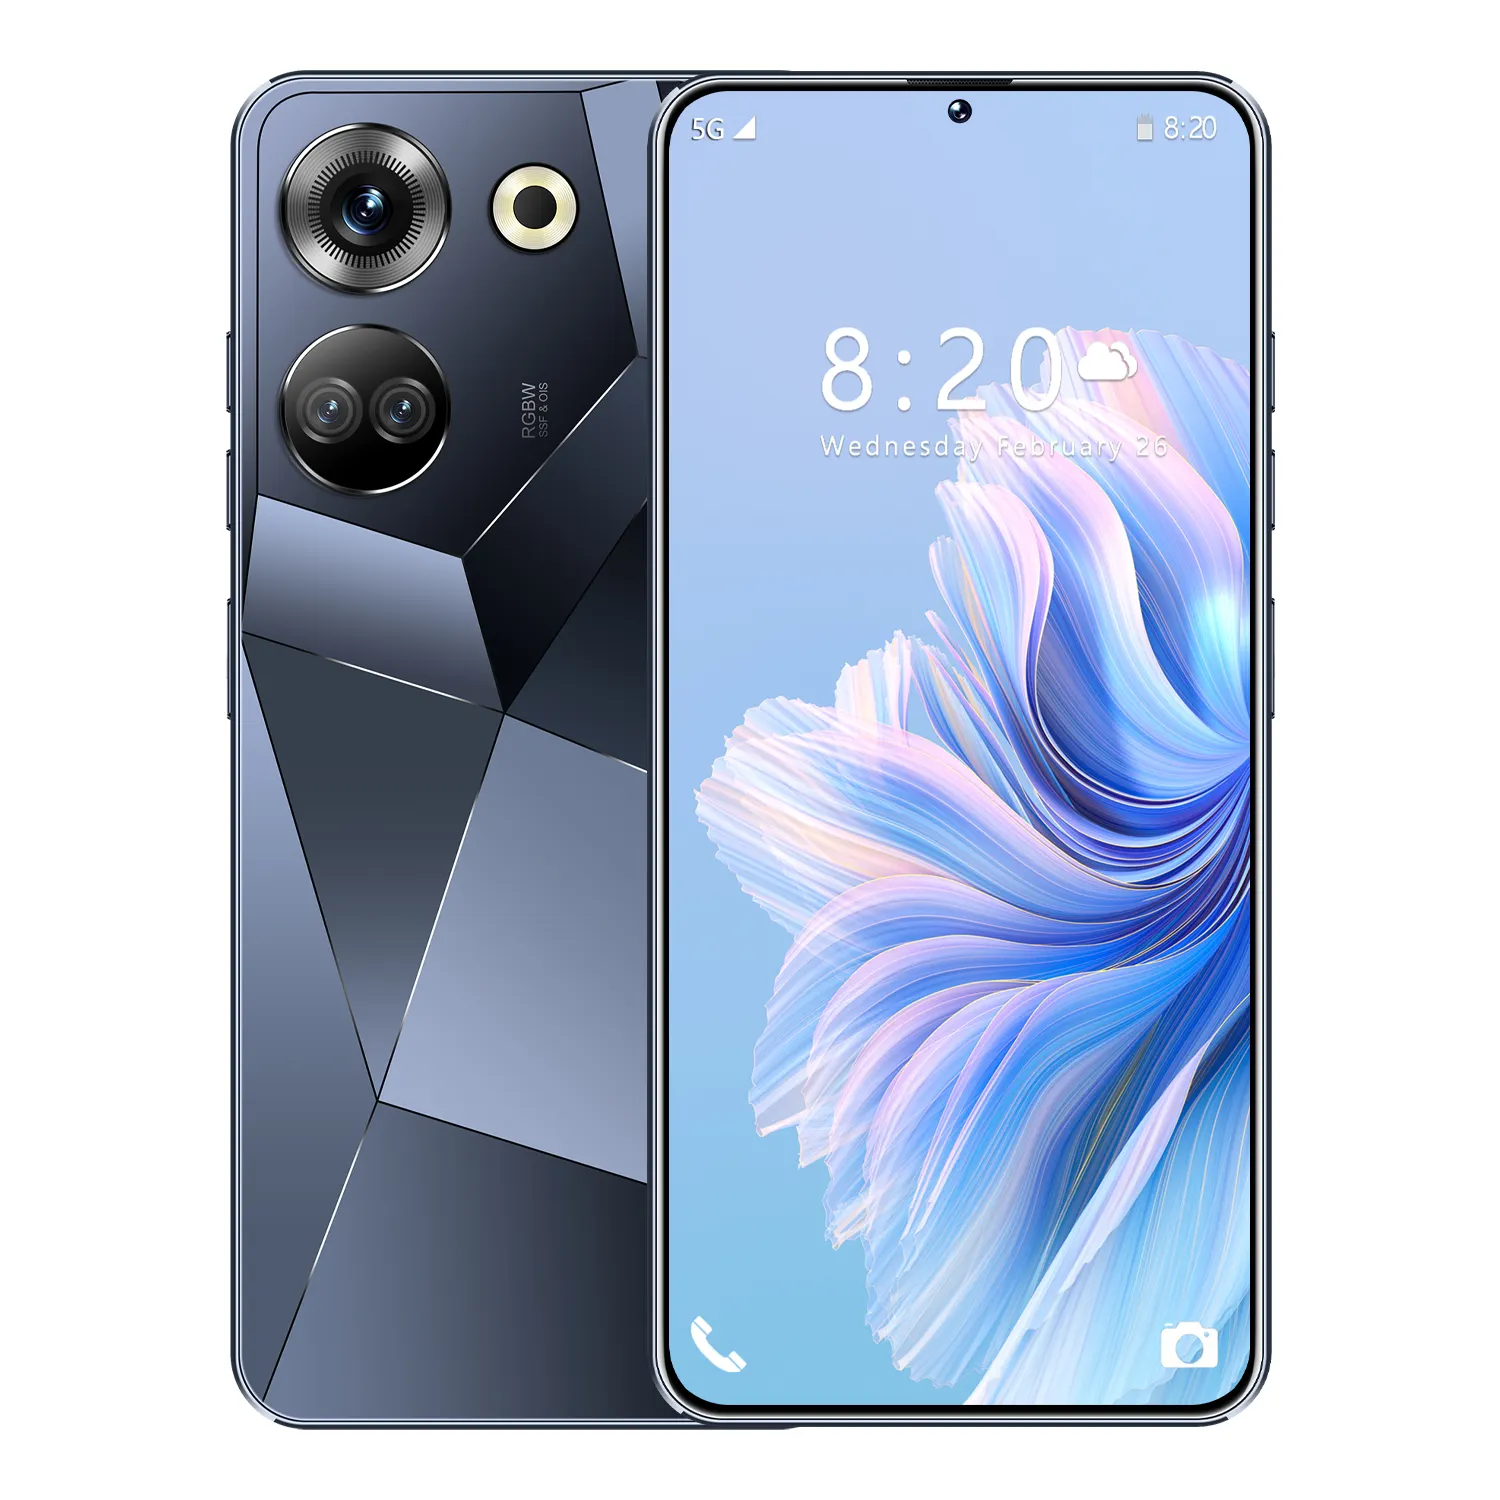 2023 New Smartphone note11 Pro HD Screen 16+512GB Memory Android Mobile Game Video Phone Low Price c20 pro